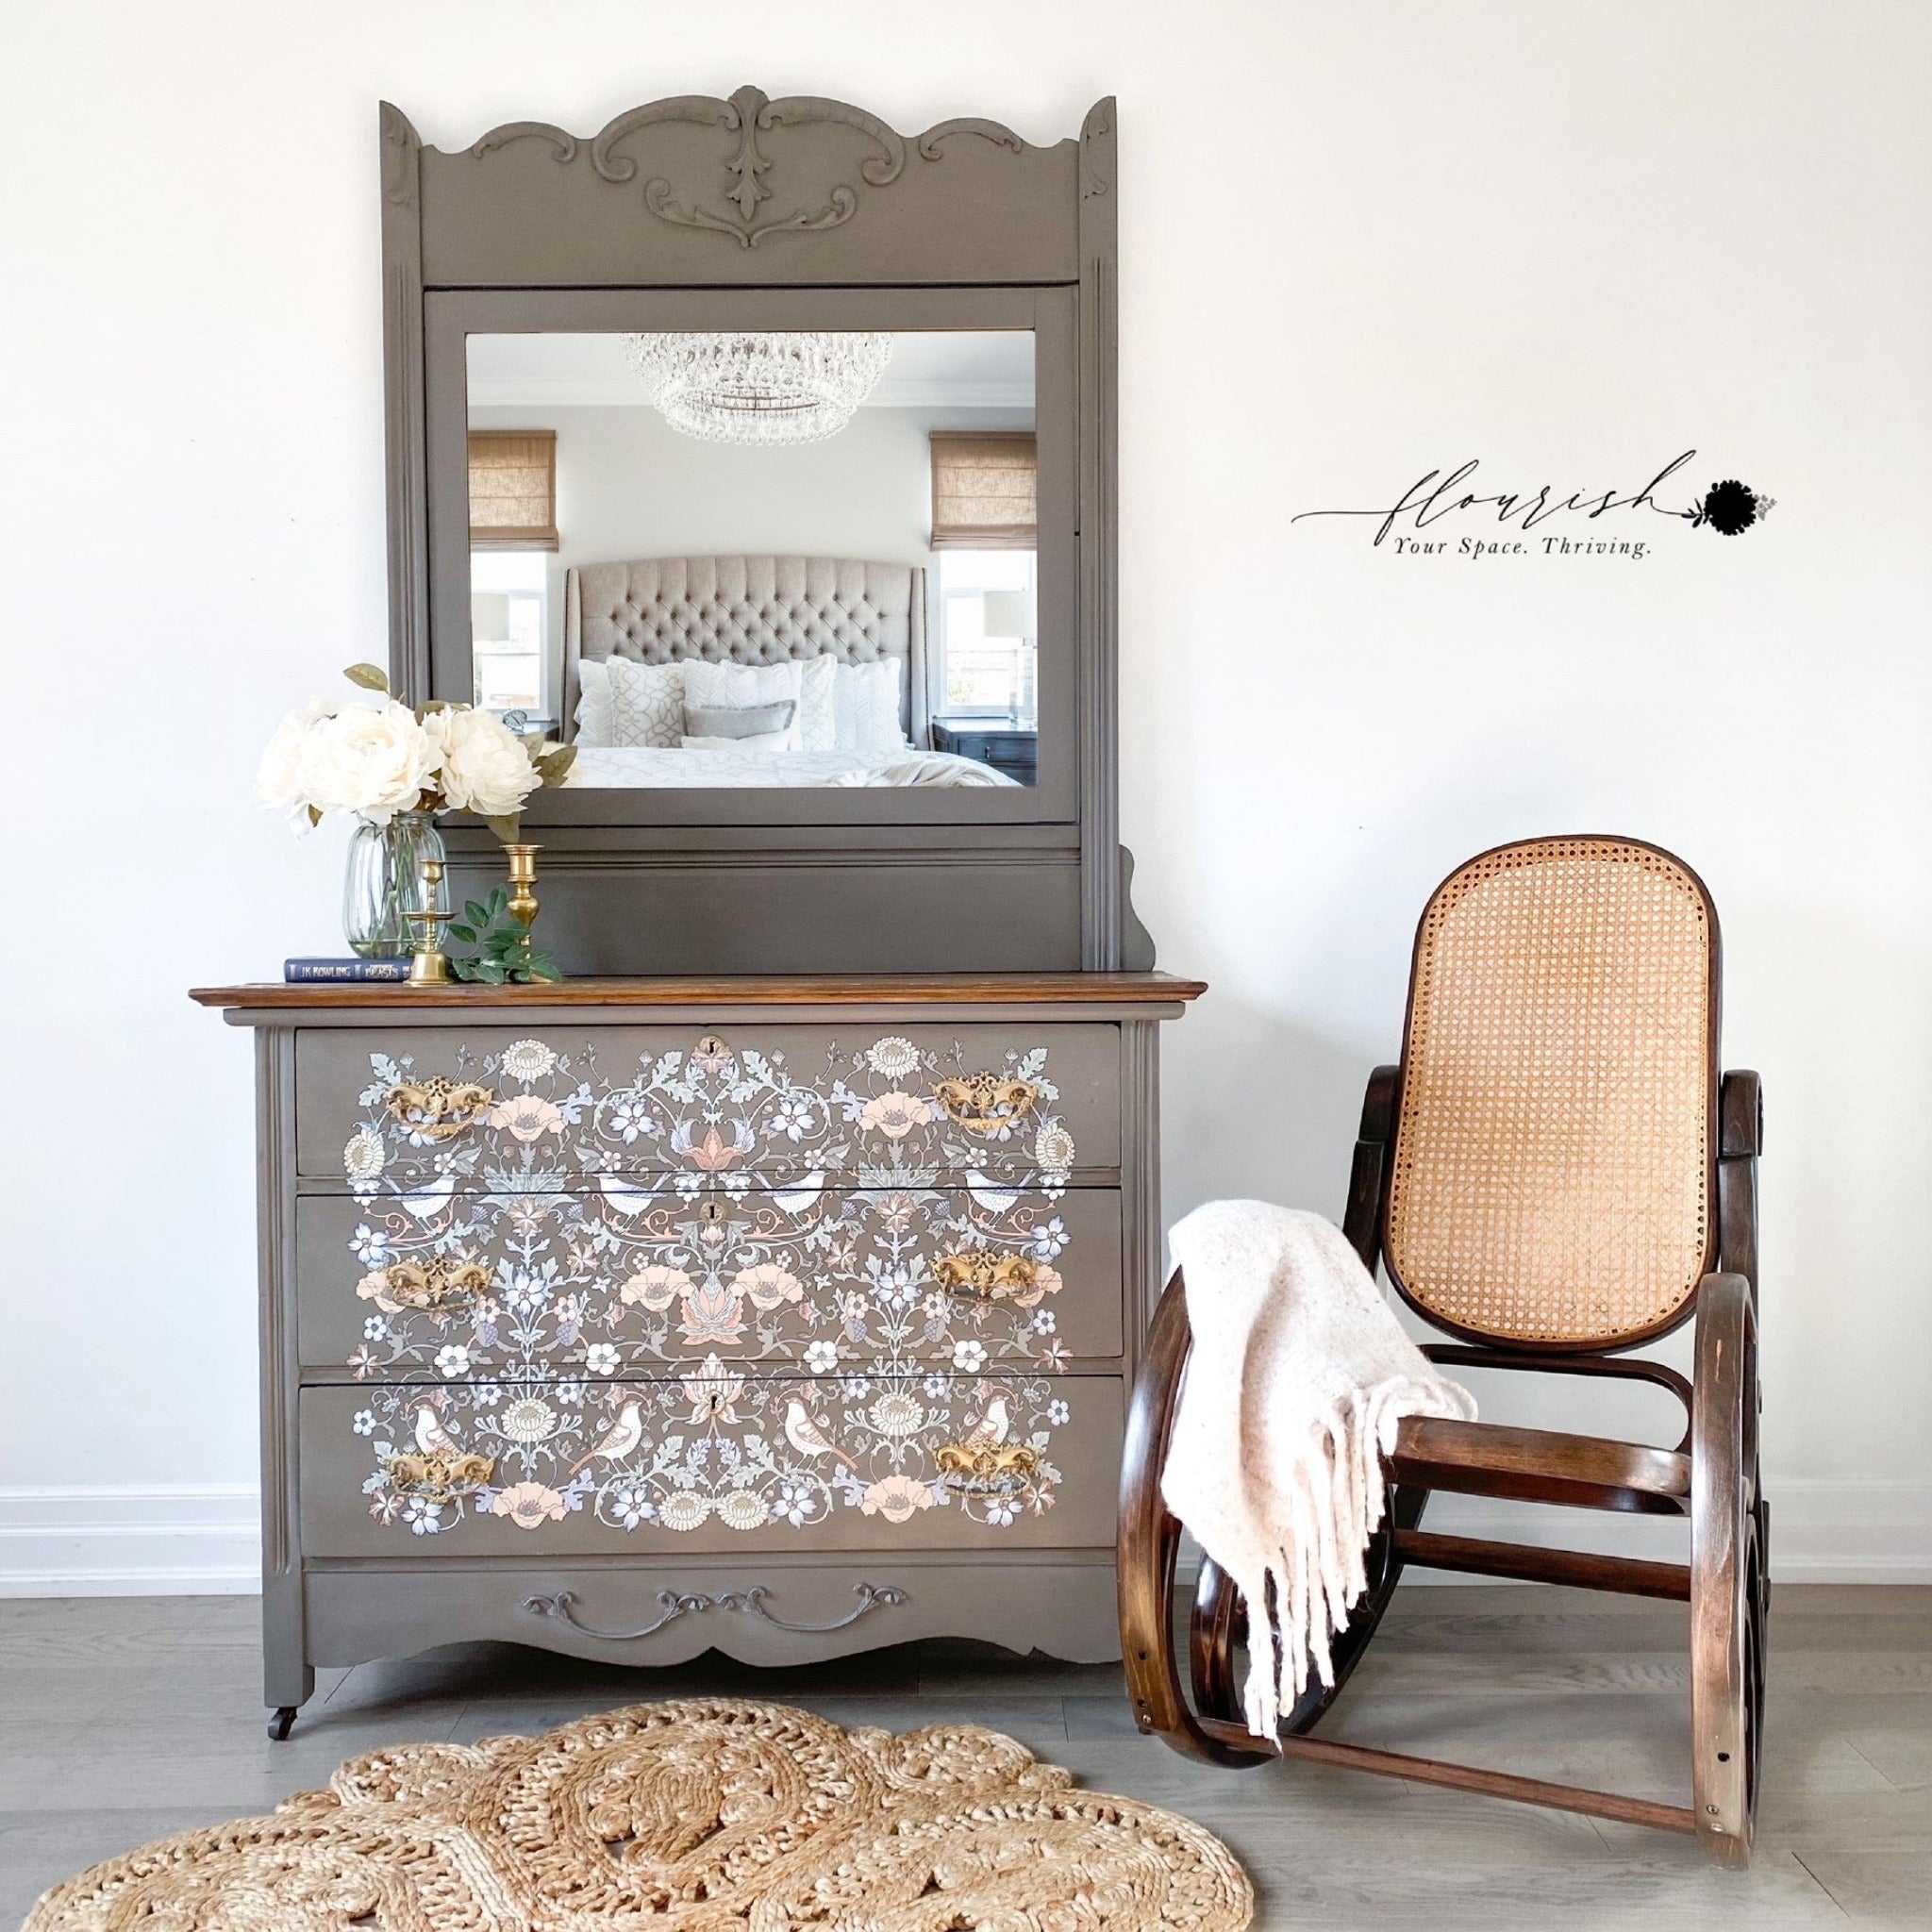 A vintage 3-drawer dresser with an attached mirror refurbished by Flourish Your Space Thriving is painted a light grey-brown and features ReDesign with Prima's Albery transfer on its drawers.